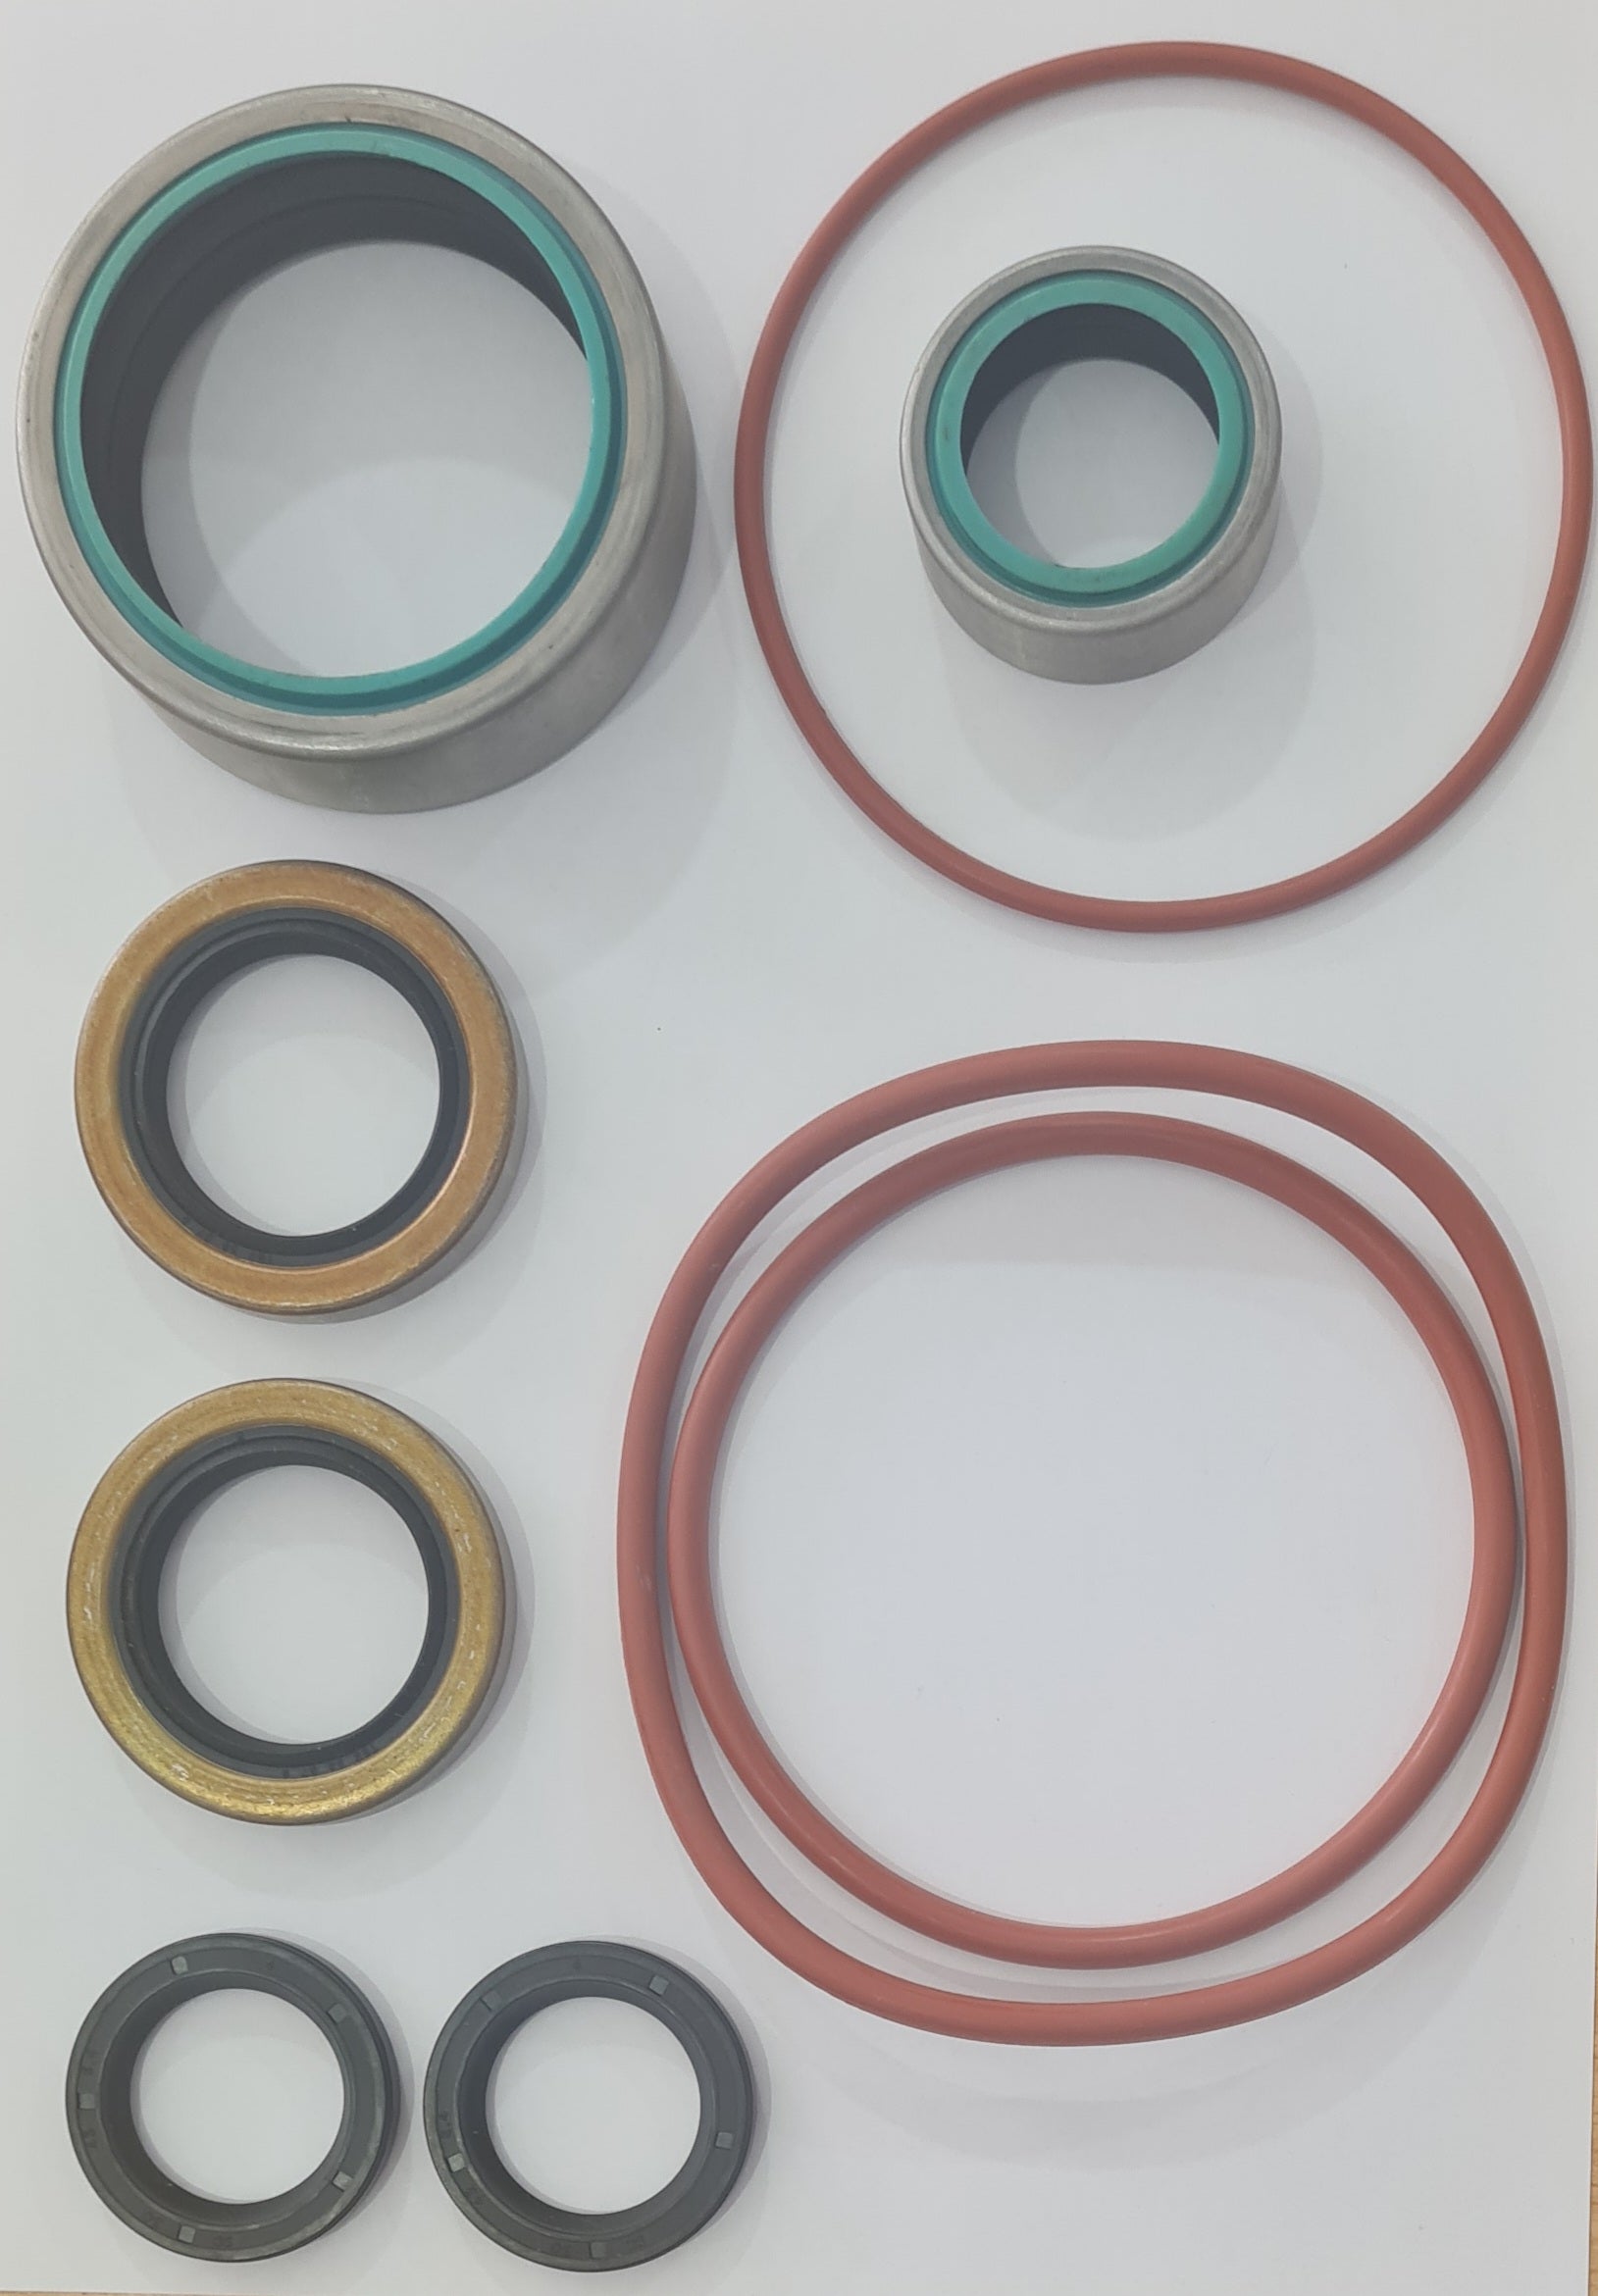 BRAVO  1 and 2 Lower Unit / Prop Shaft Seal Kit Mercruiser 26-76868A04 Replacement